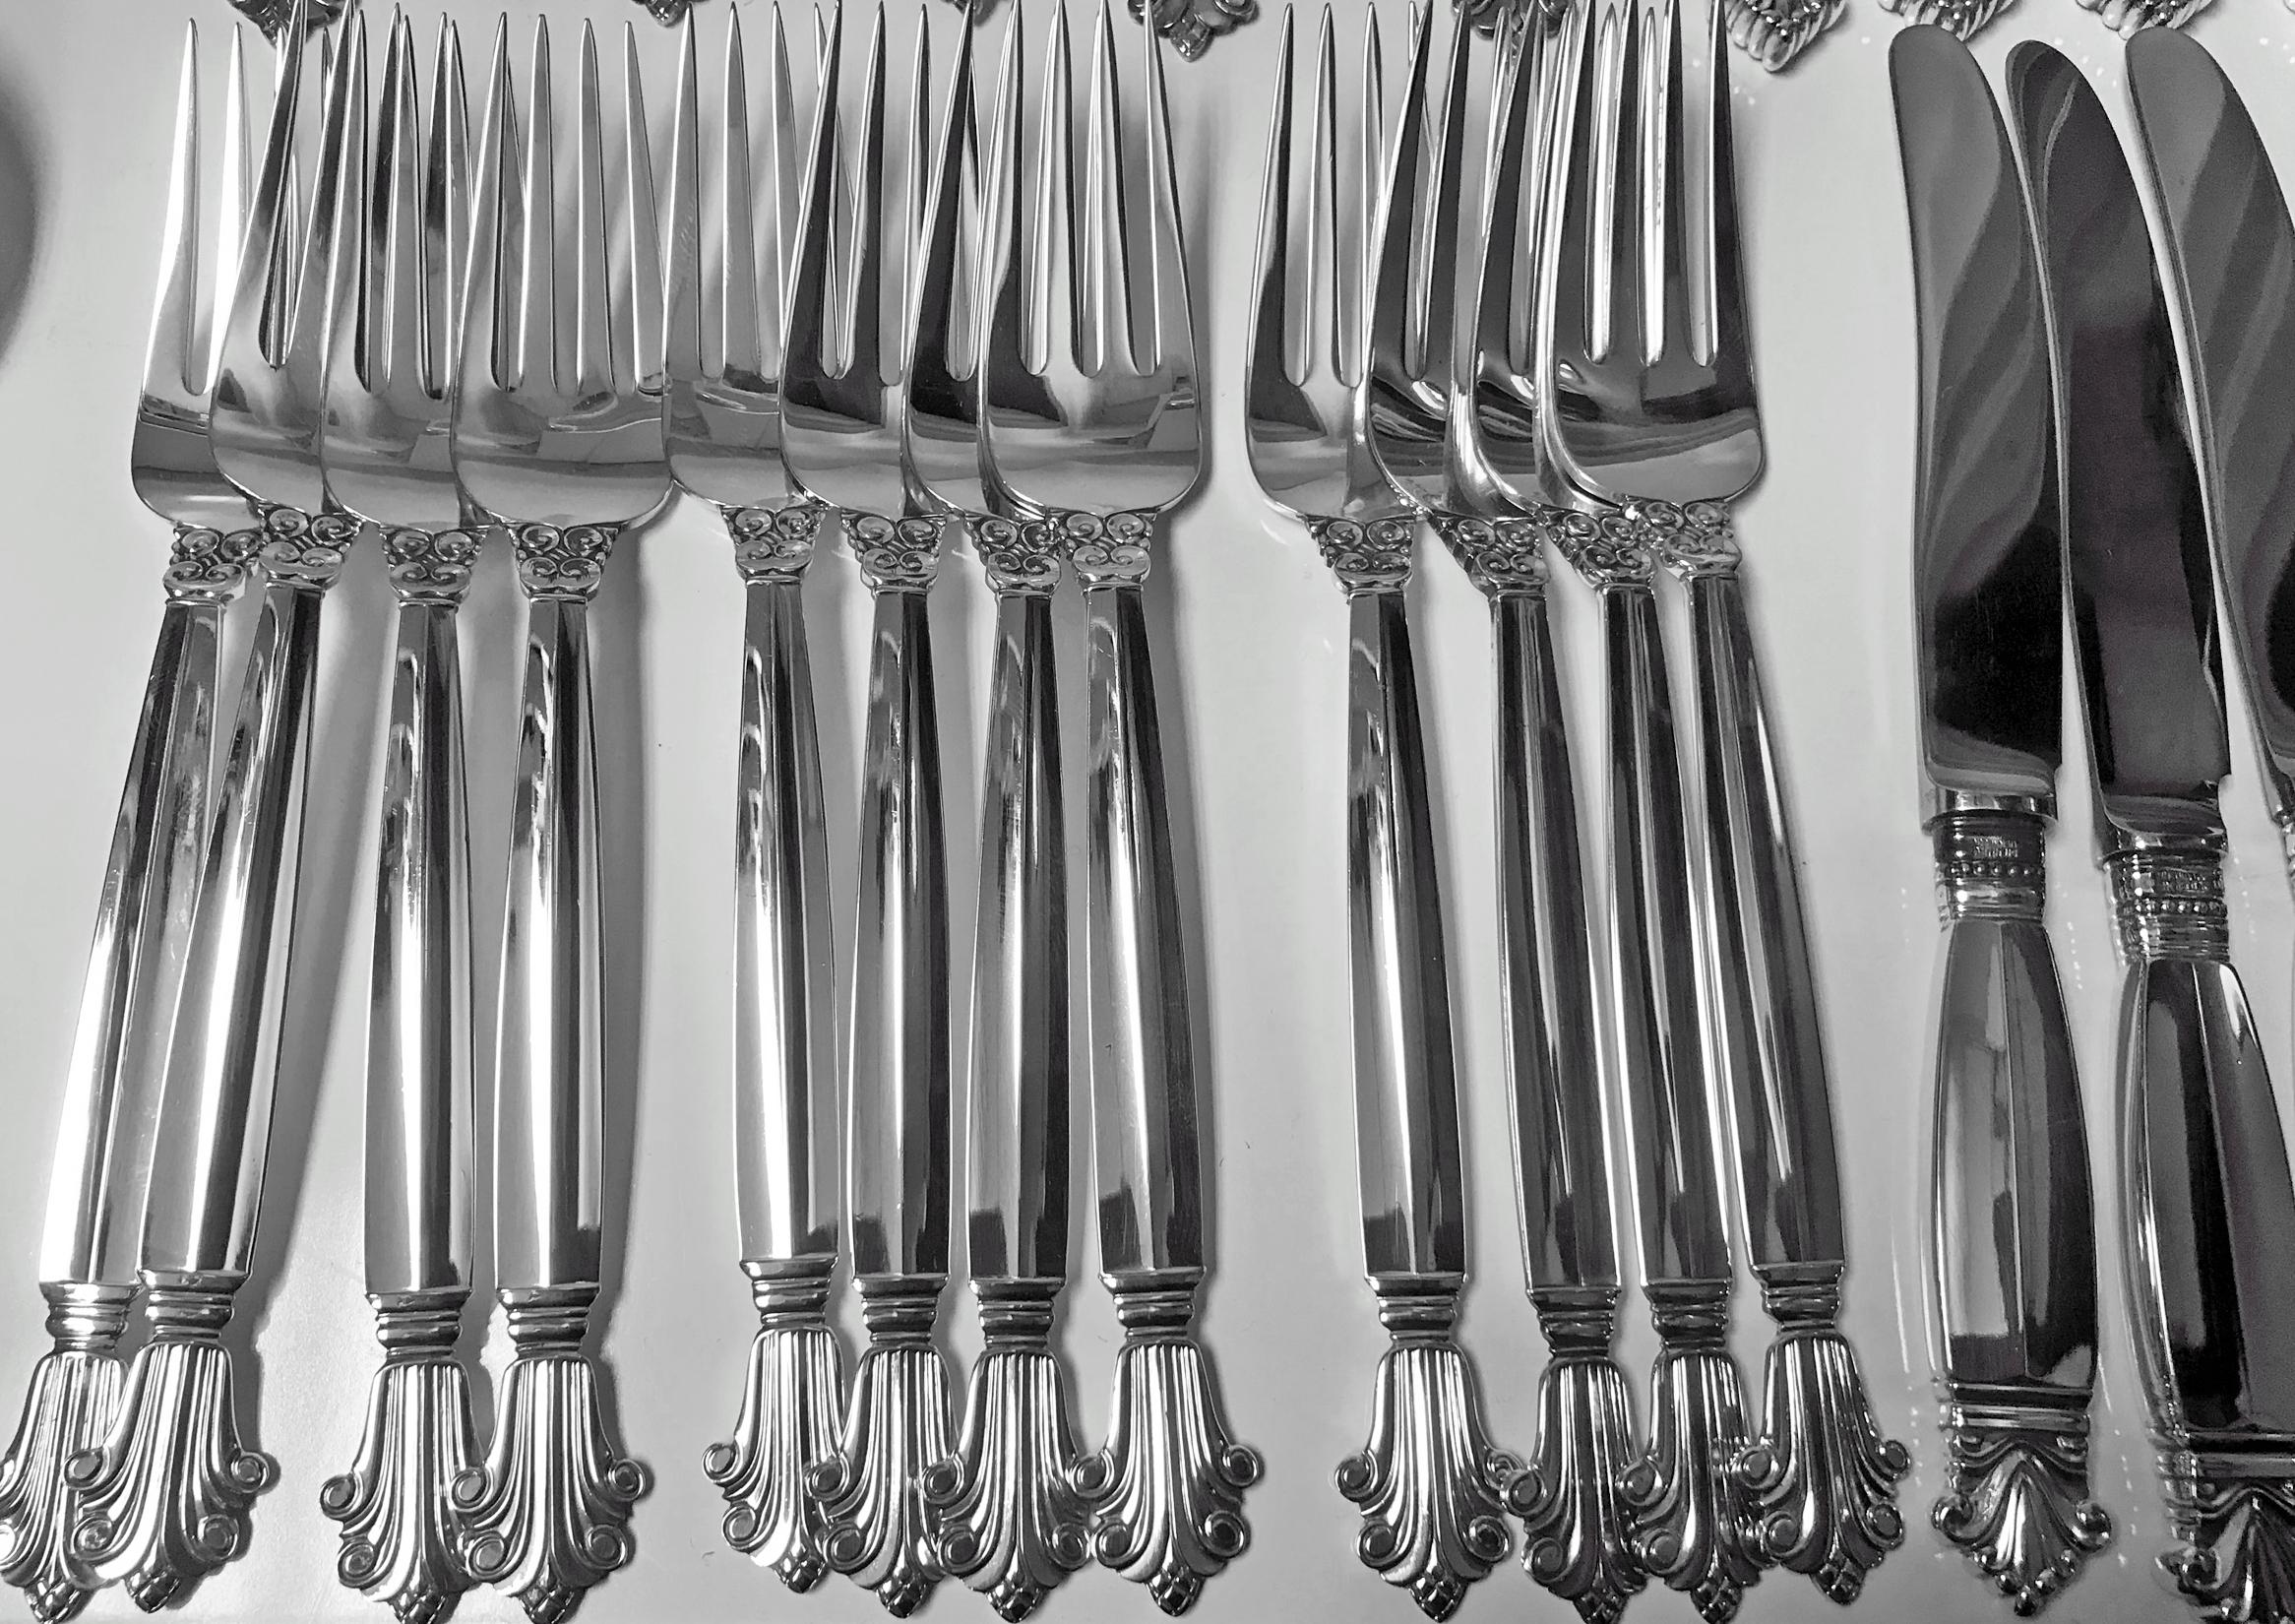 Acanthus by Georg Jensen sterling silver flatware set, 72 pieces. this set includes: 12 dinner knives (9 inch), 12 dinner forks (7 1/8 inch), 12 salad forks ( 6 1/8 inch), 12 dessert spoons (6 1/8 inch), 12 larger spoons (6 7/8 inches), 12 butter